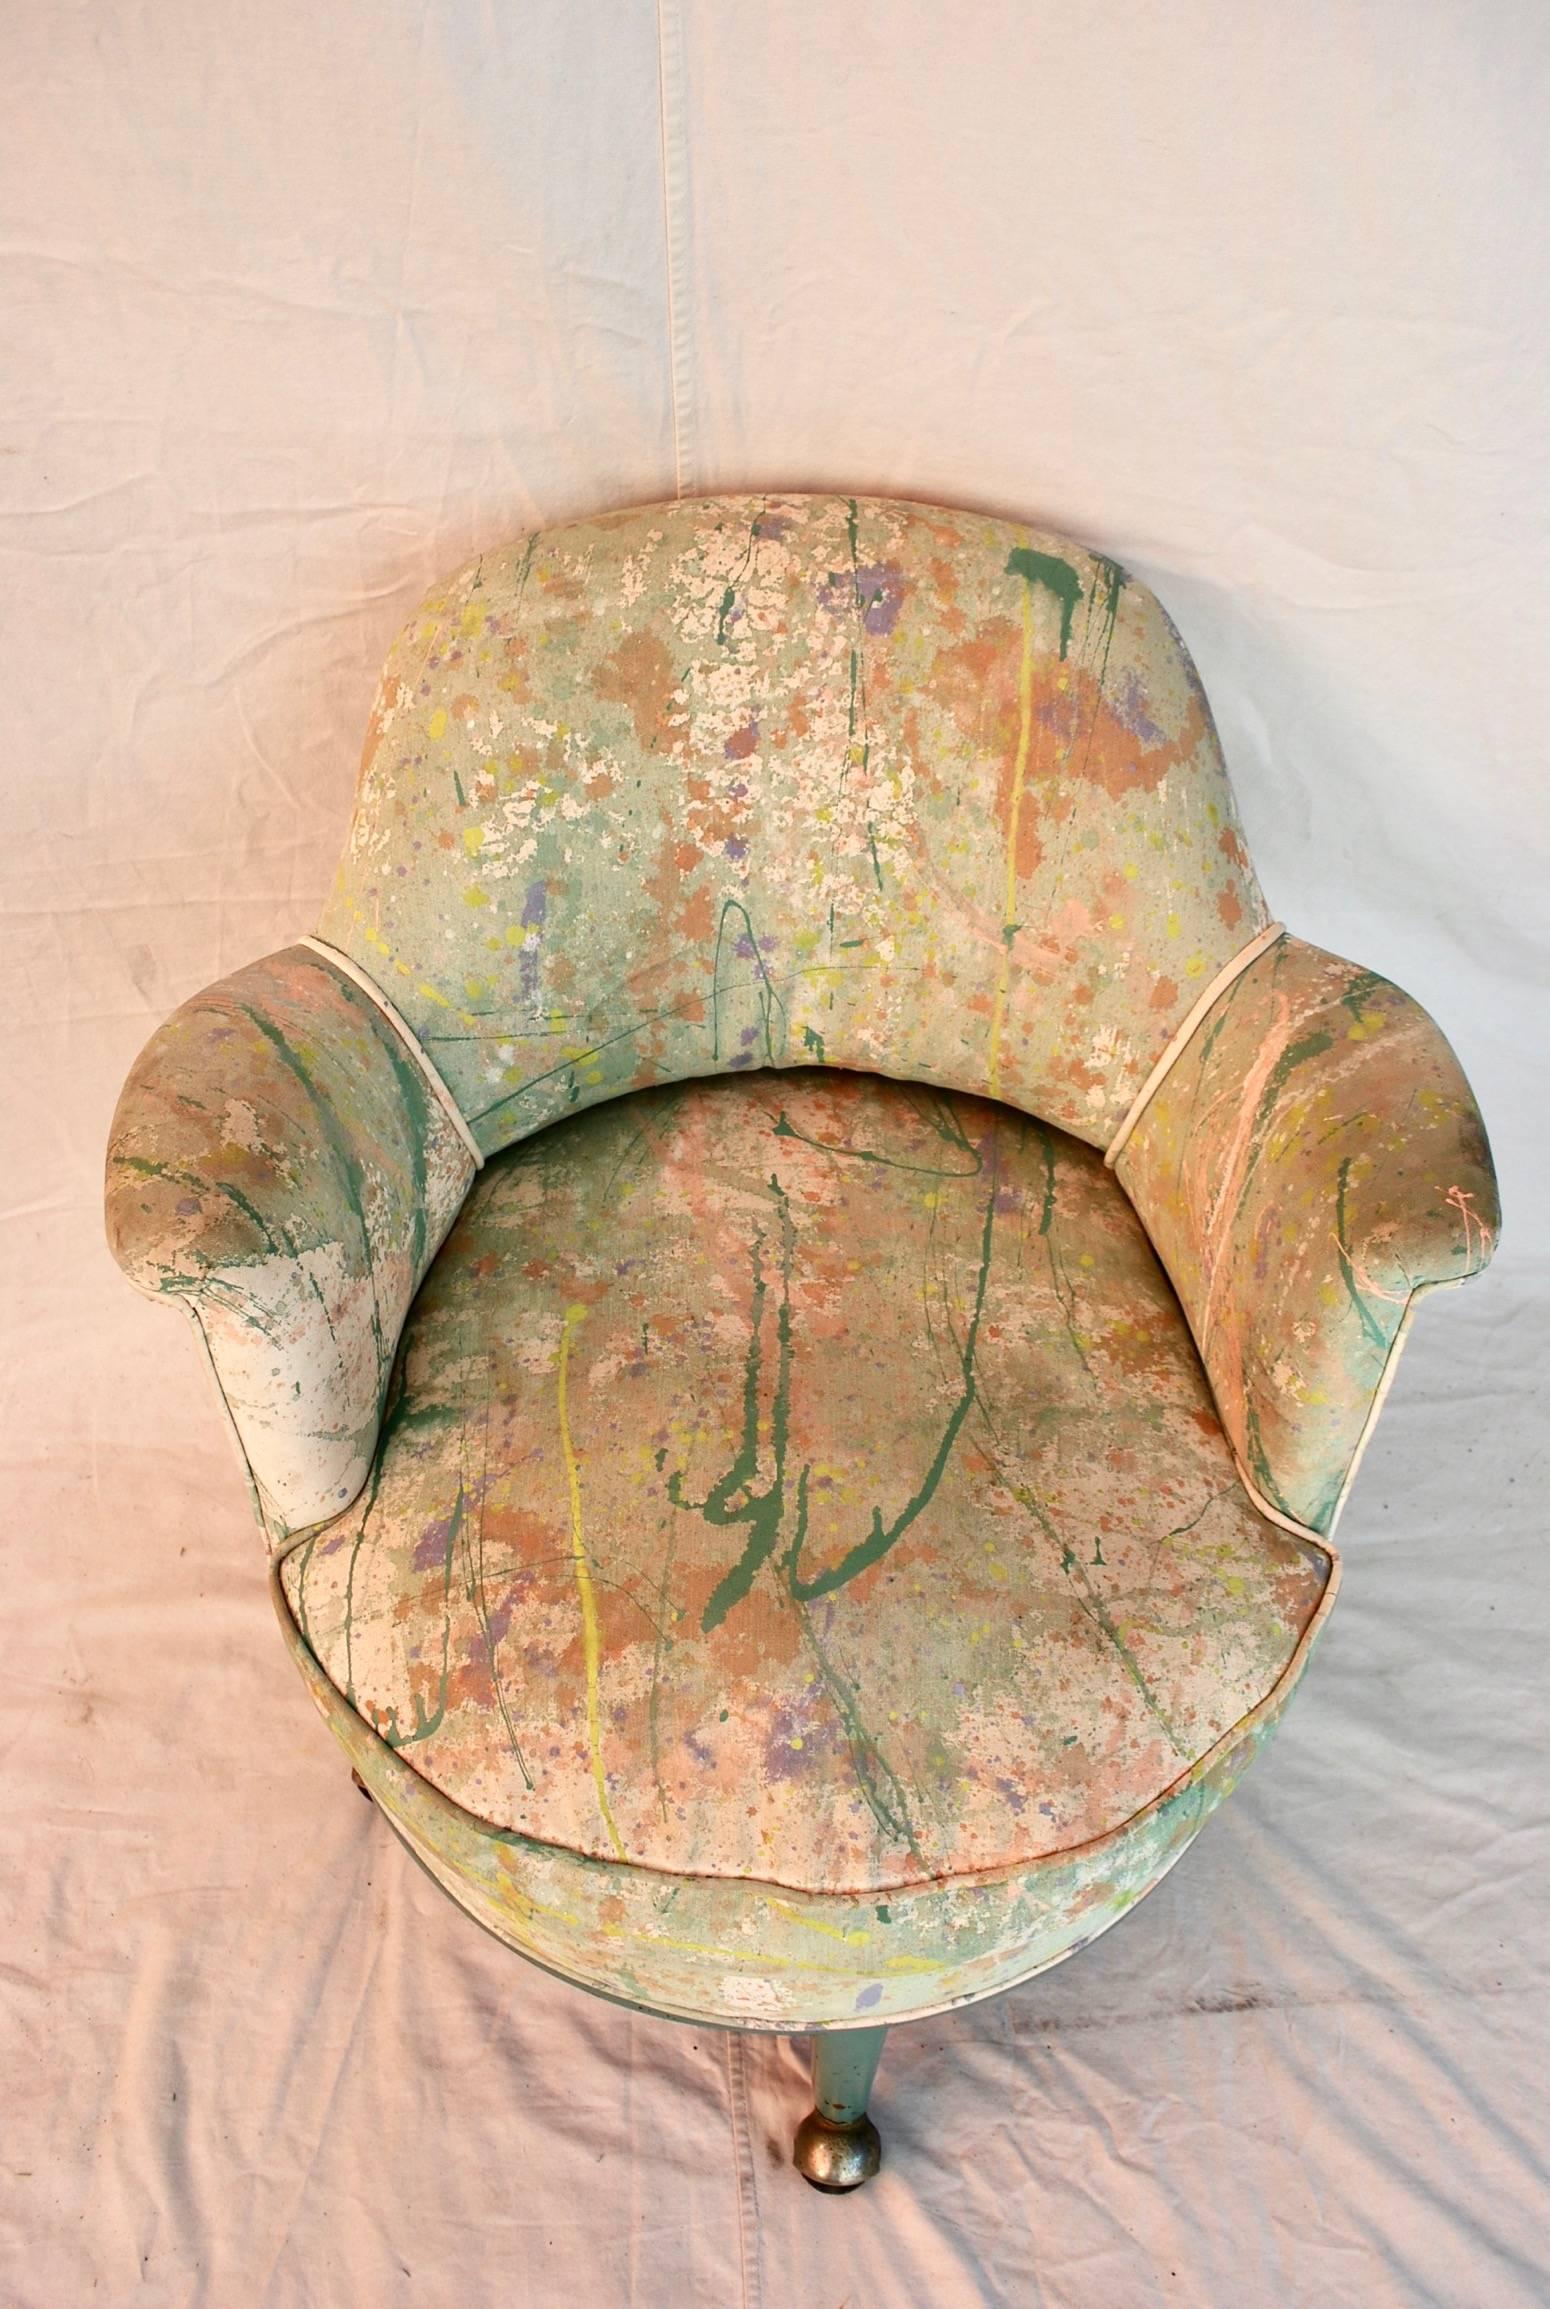 A very rare Monteverdi young chair with Jack lennor Larsen hand-painted fabric, it is quite rare
All original, the patina is so much more beautiful in person.